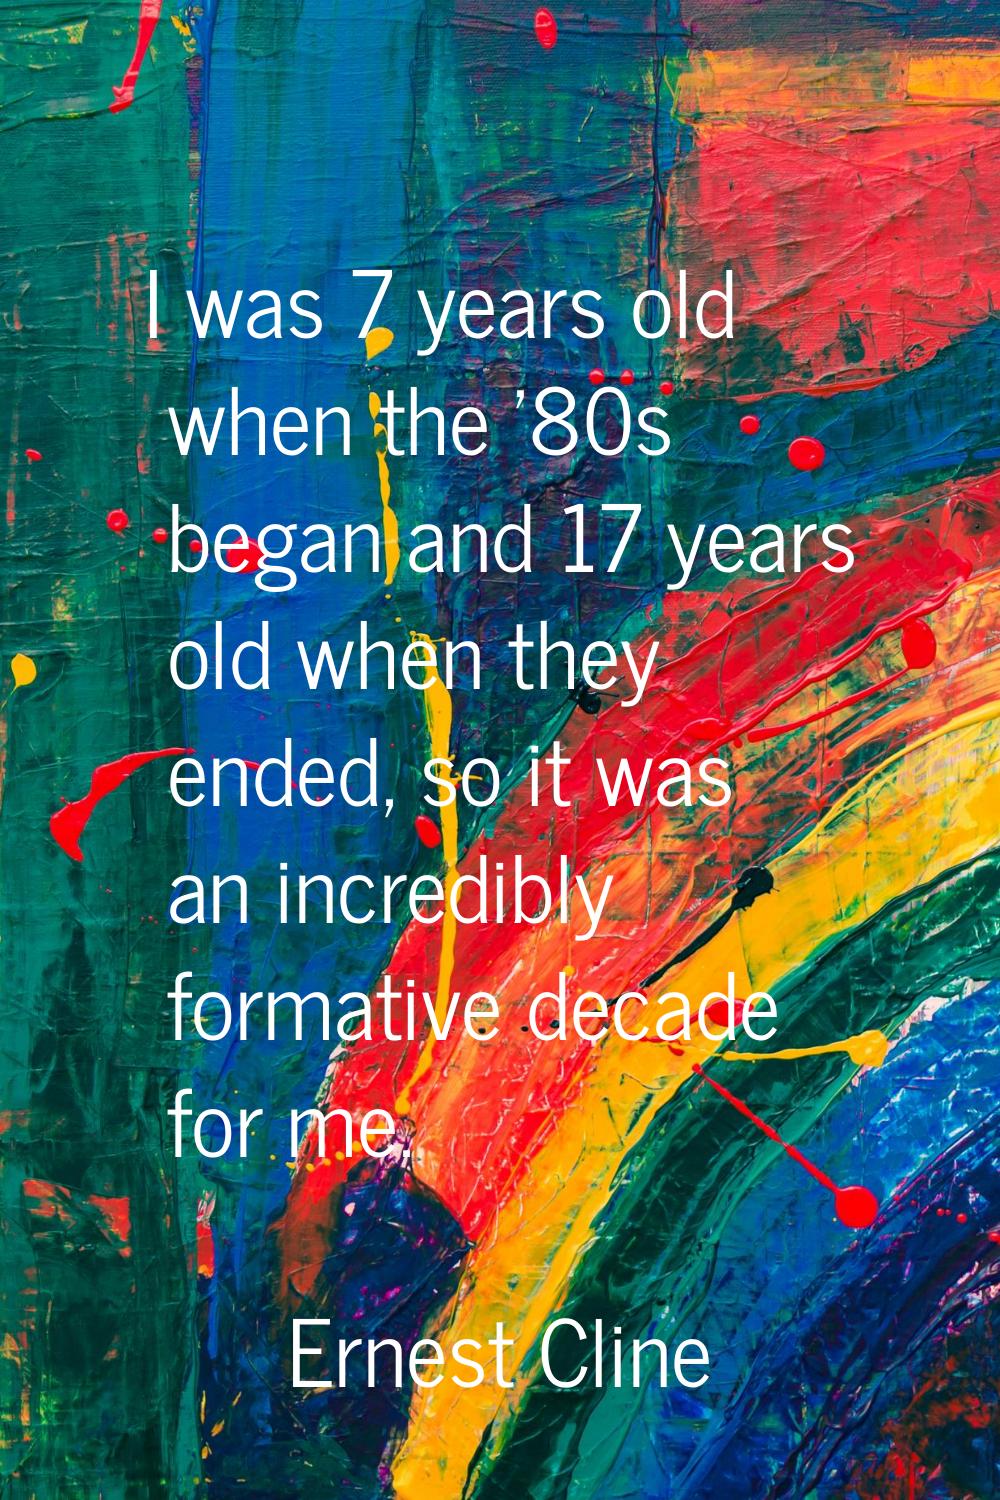 I was 7 years old when the '80s began and 17 years old when they ended, so it was an incredibly for